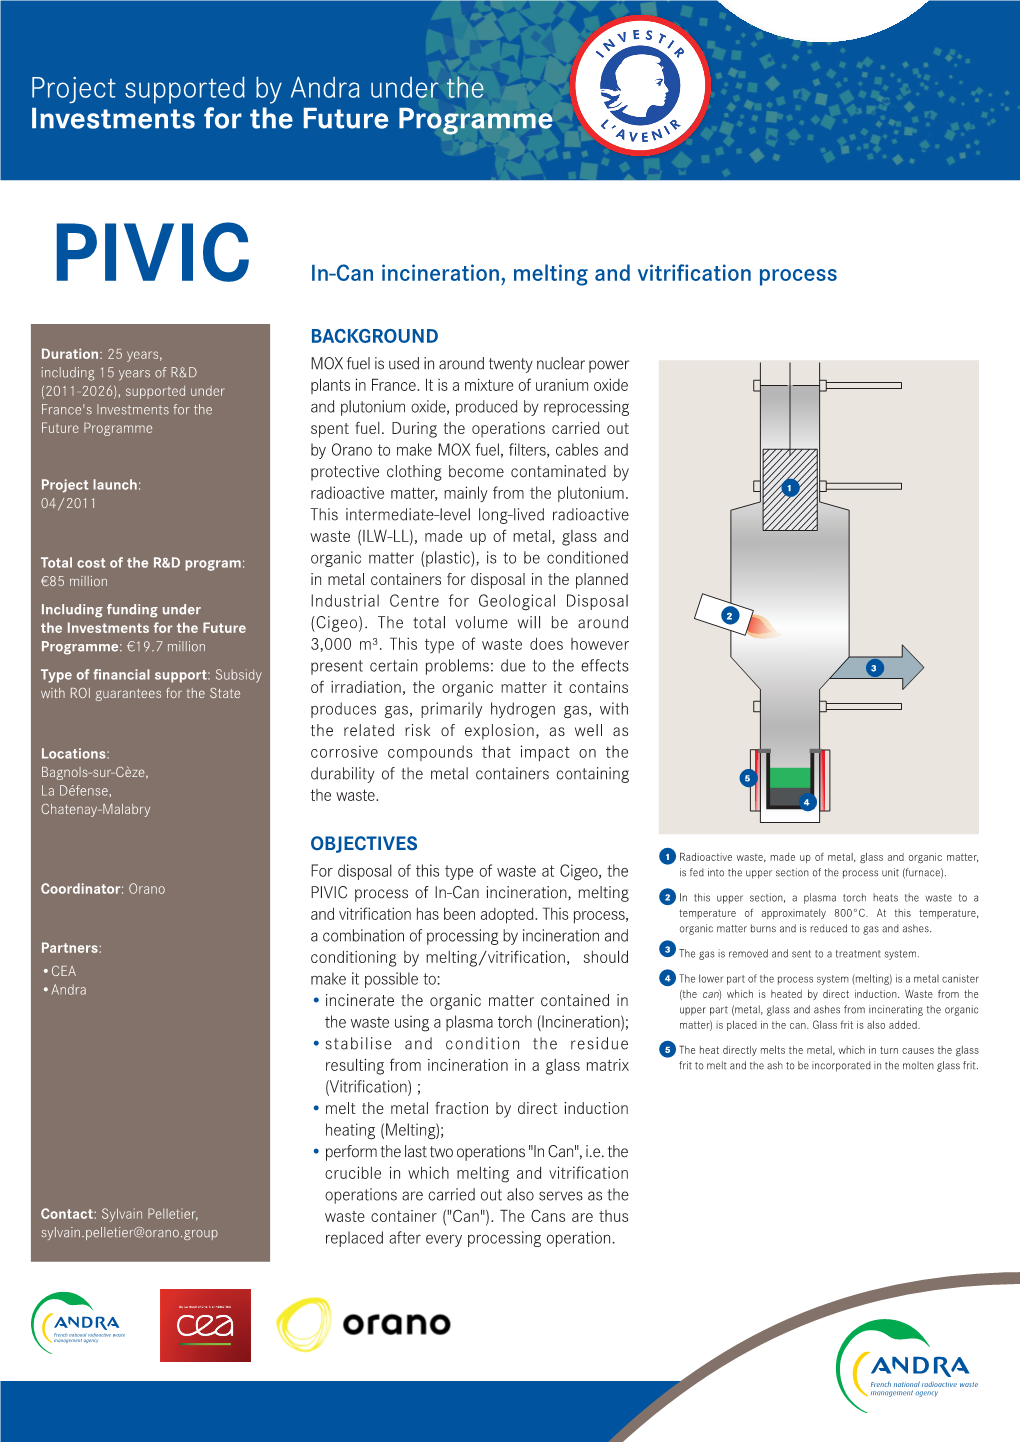 PIVIC In-Can Incineration, Melting and Vitrification Process